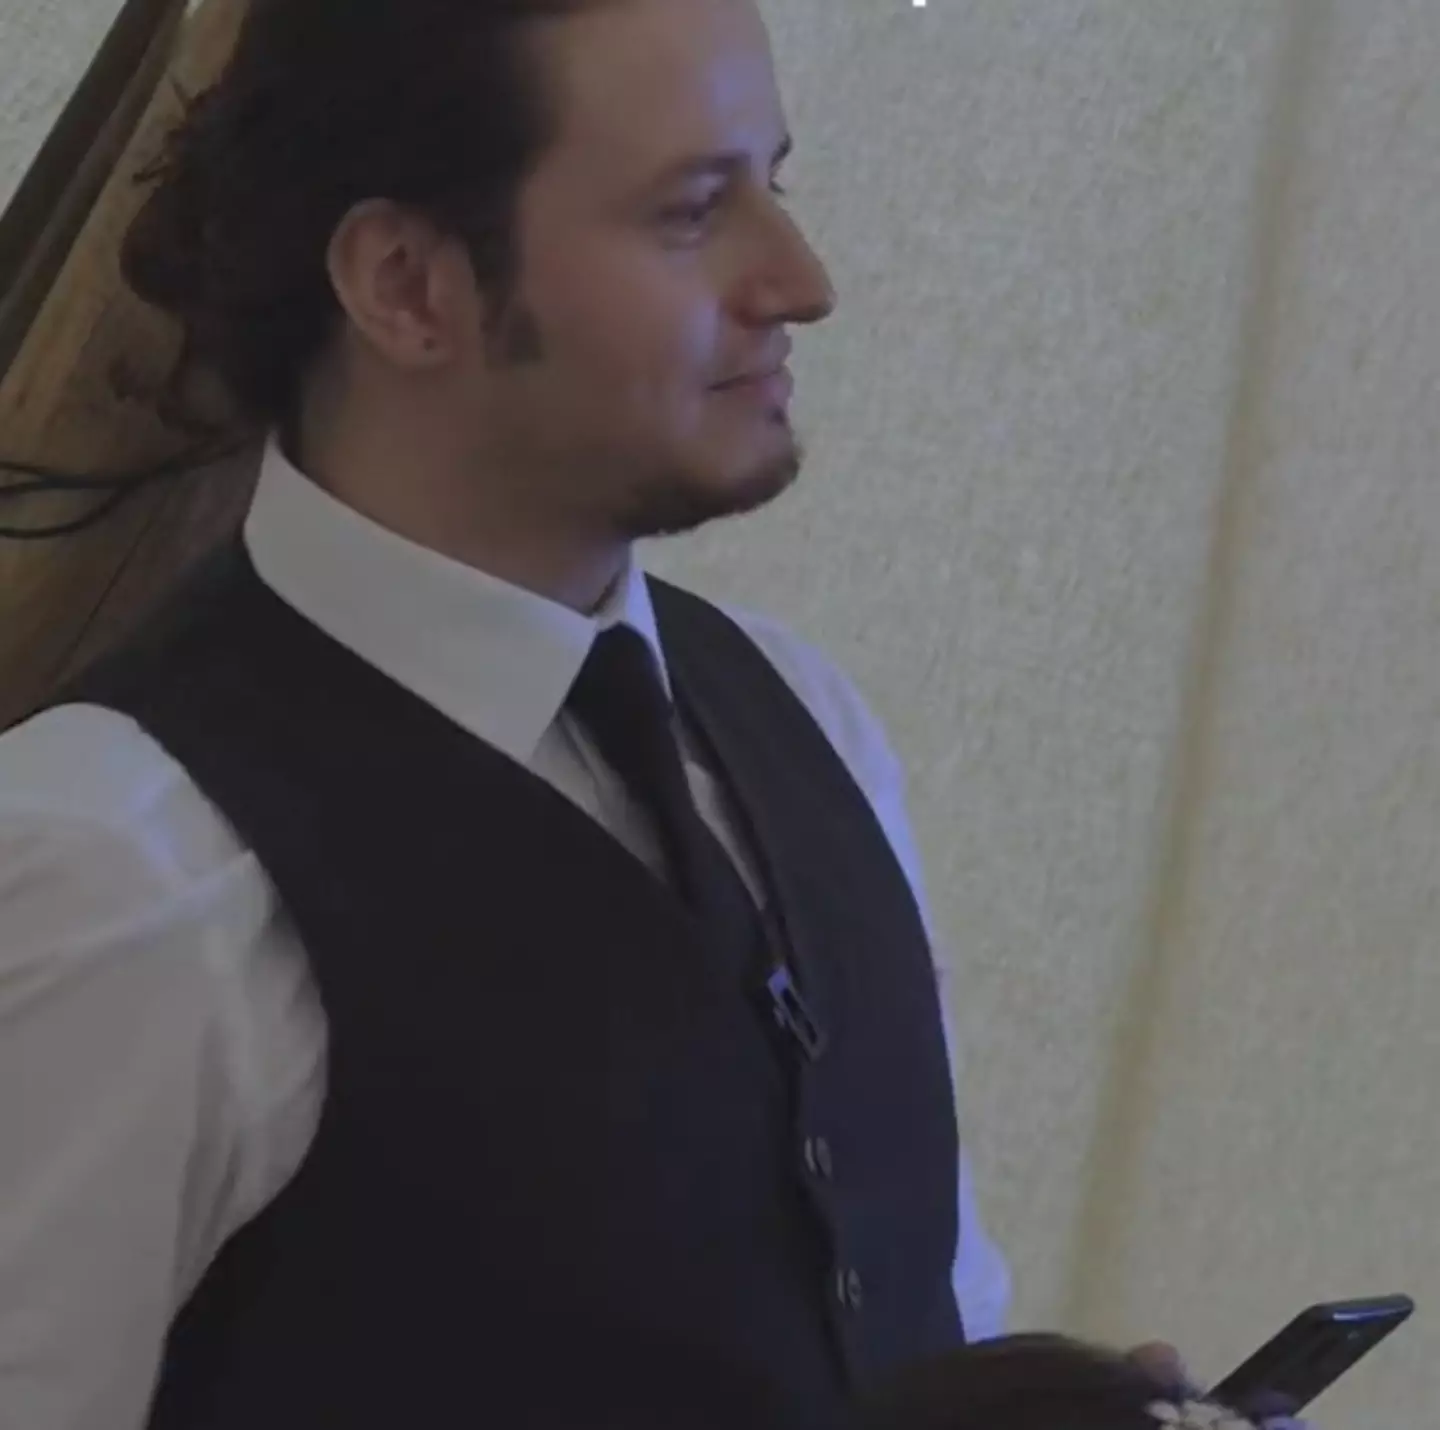 The face of a best man who knows he's done a good job with his speech and it's time to wrap things up.